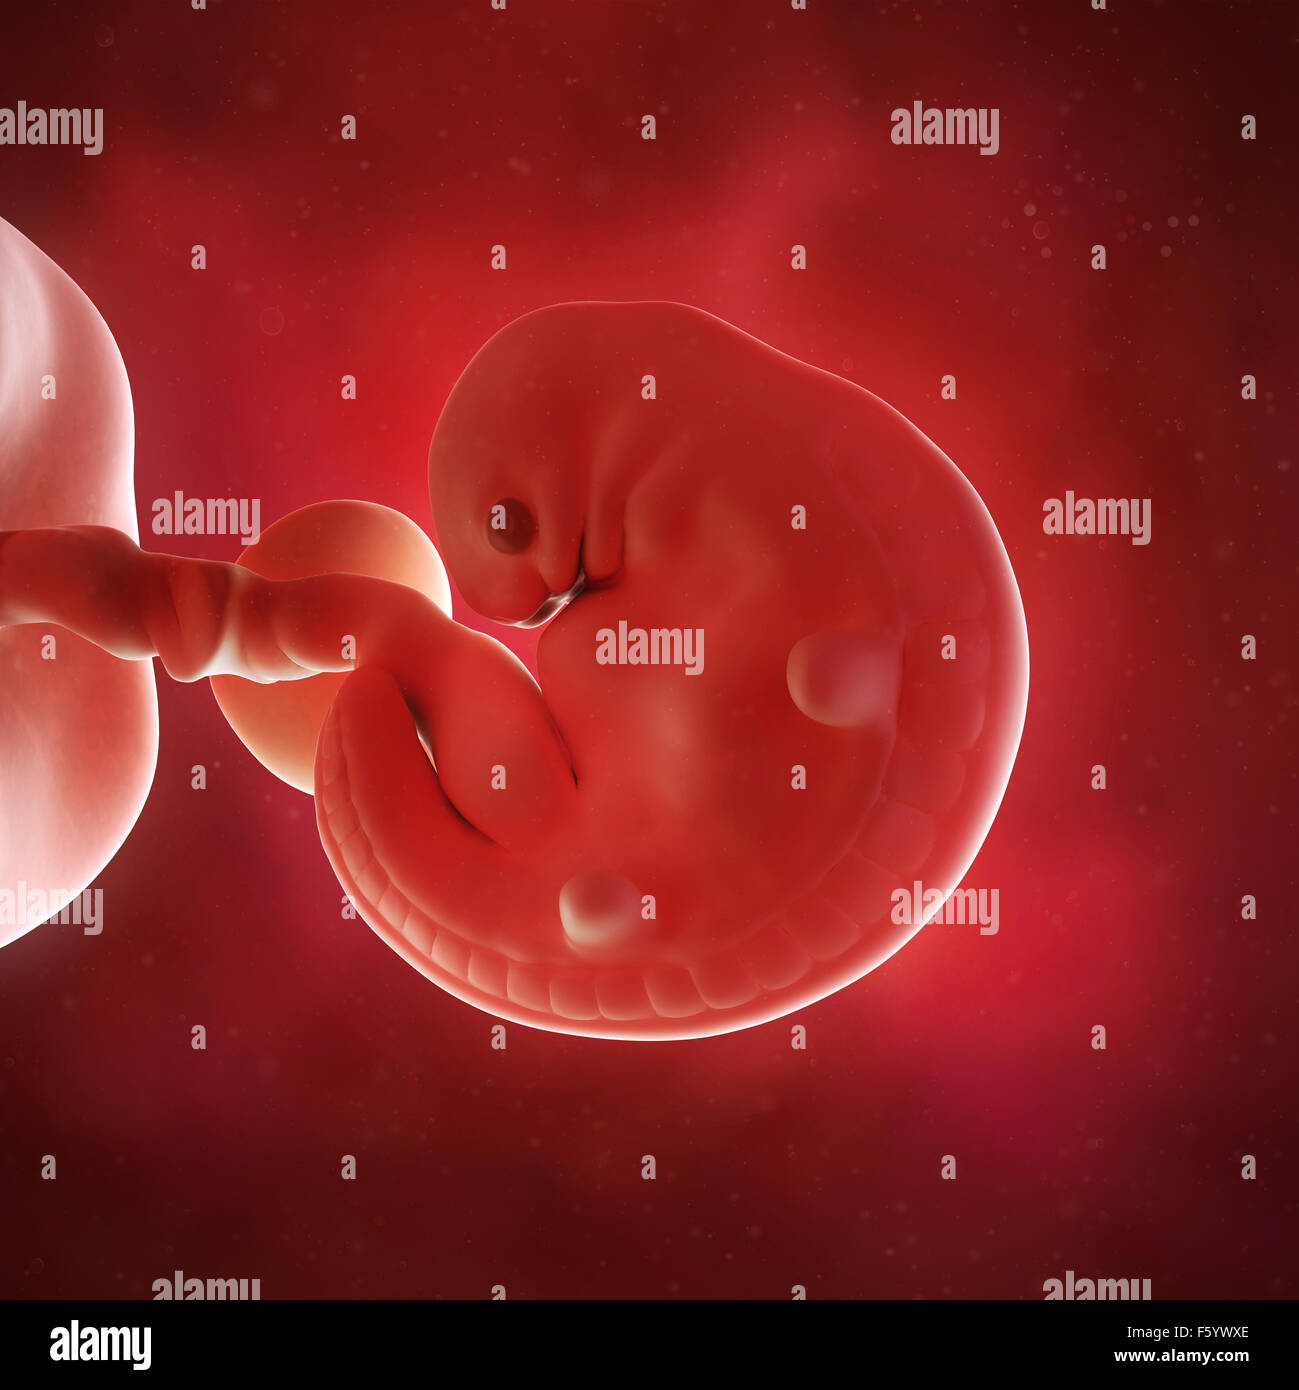 medical accurate 3d illustration of a fetus week 6 Stock Photo